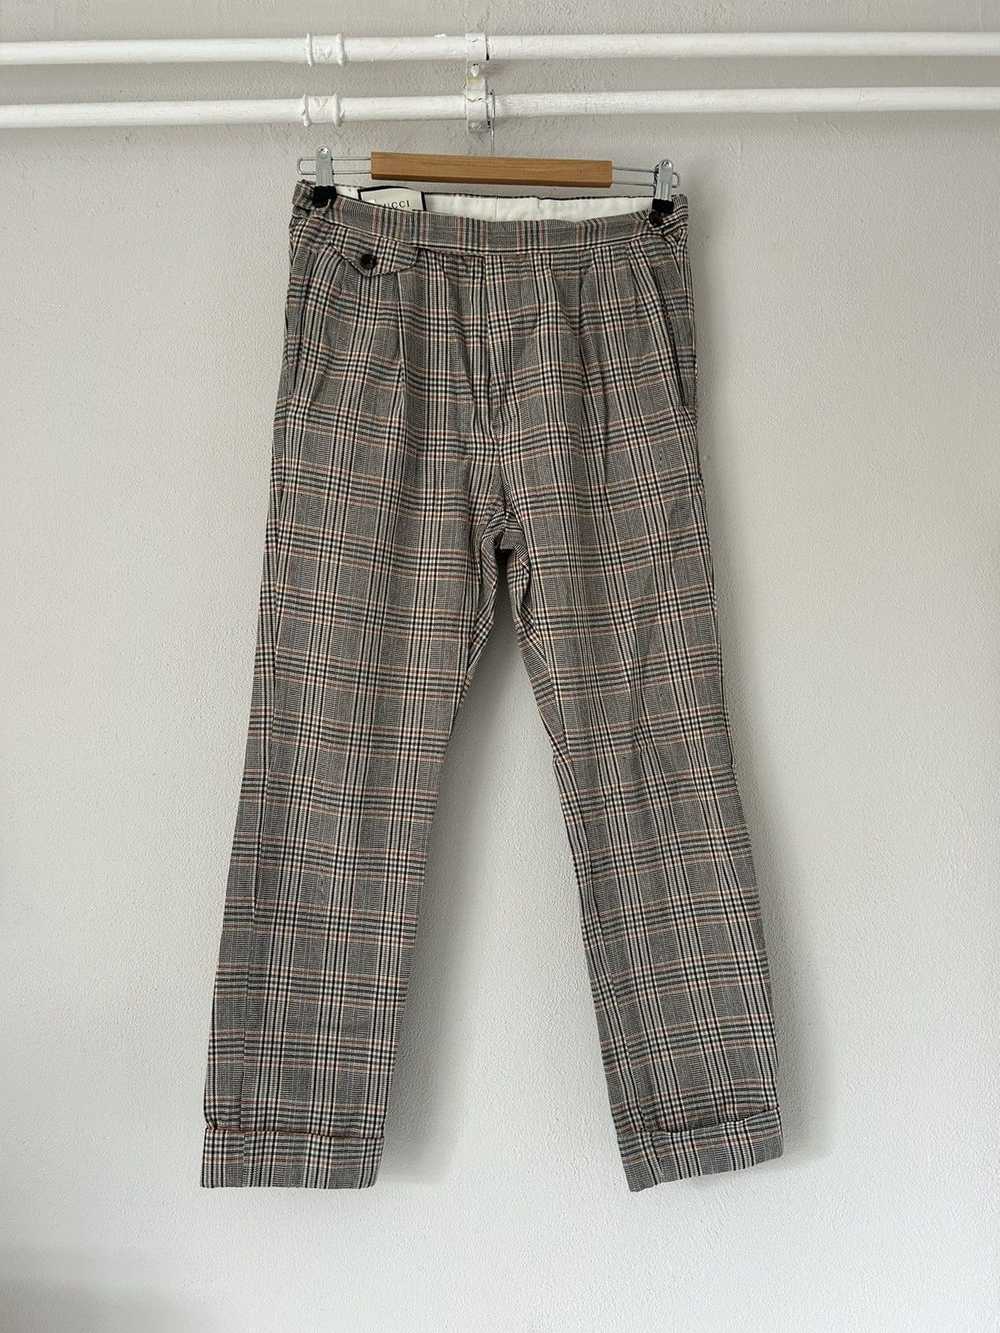 Gucci Checkered Plaid Trousers - image 2